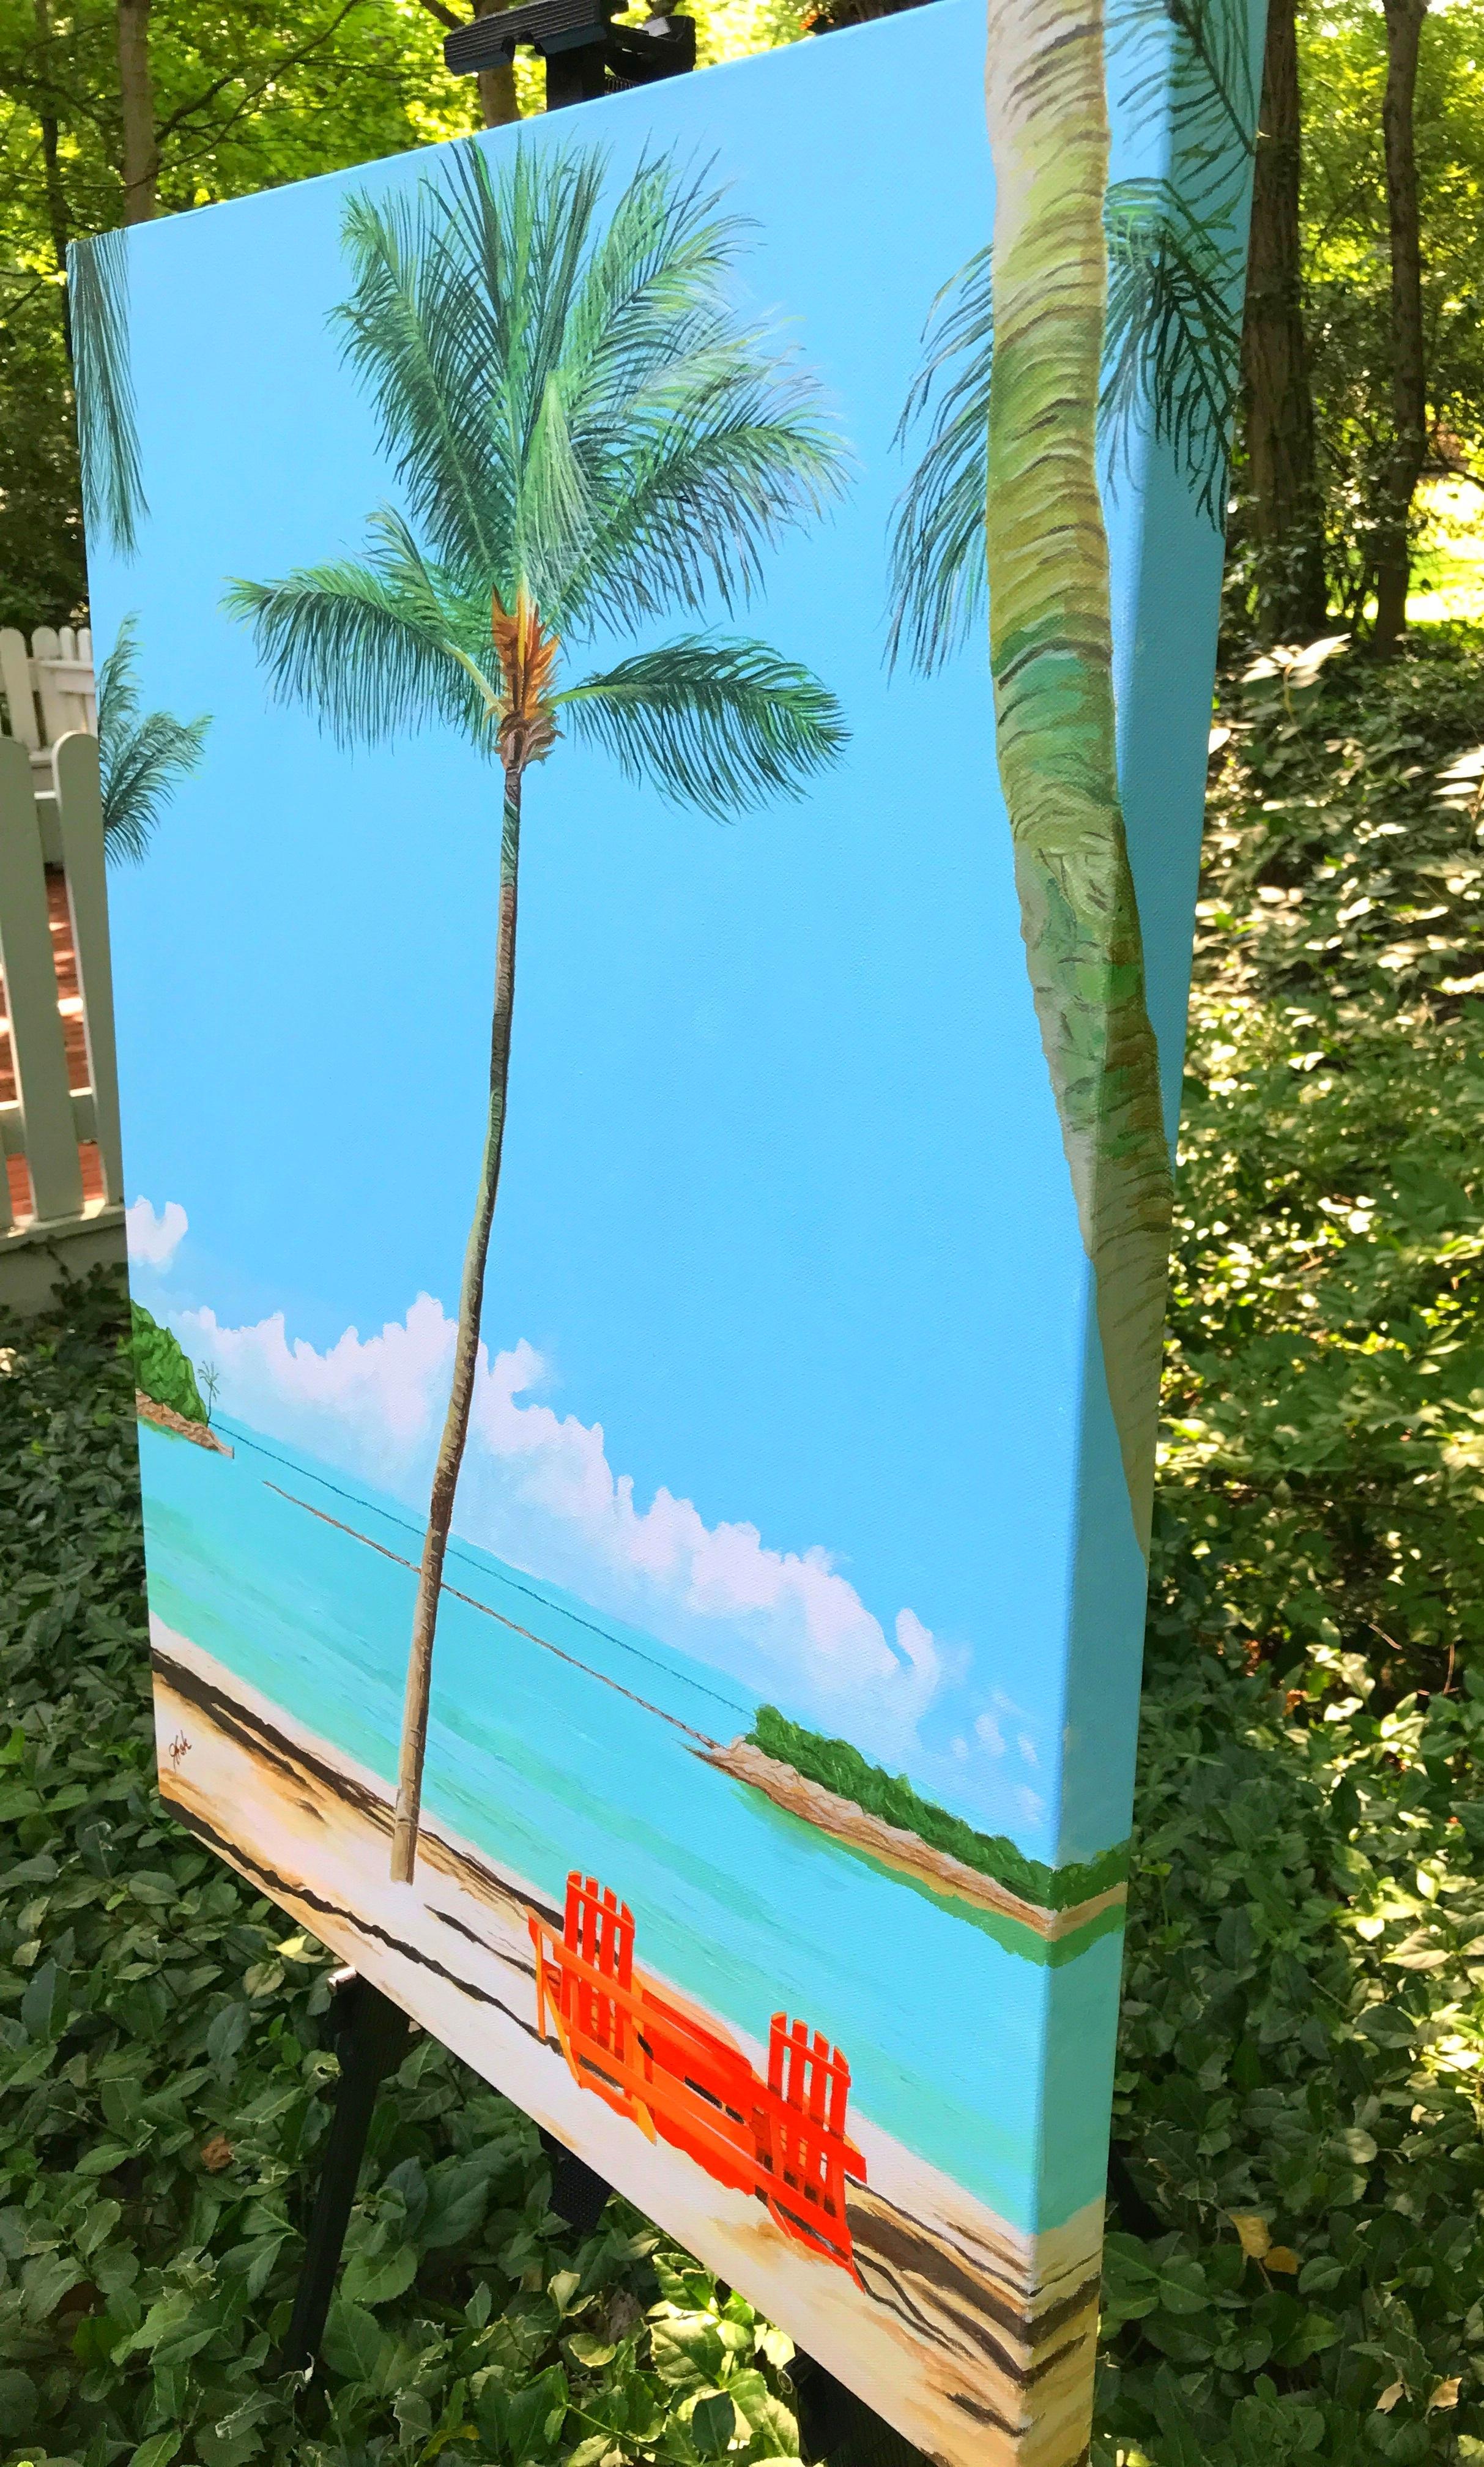 Dreaming of Palm Trees, Original Painting - Realist Art by John Jaster